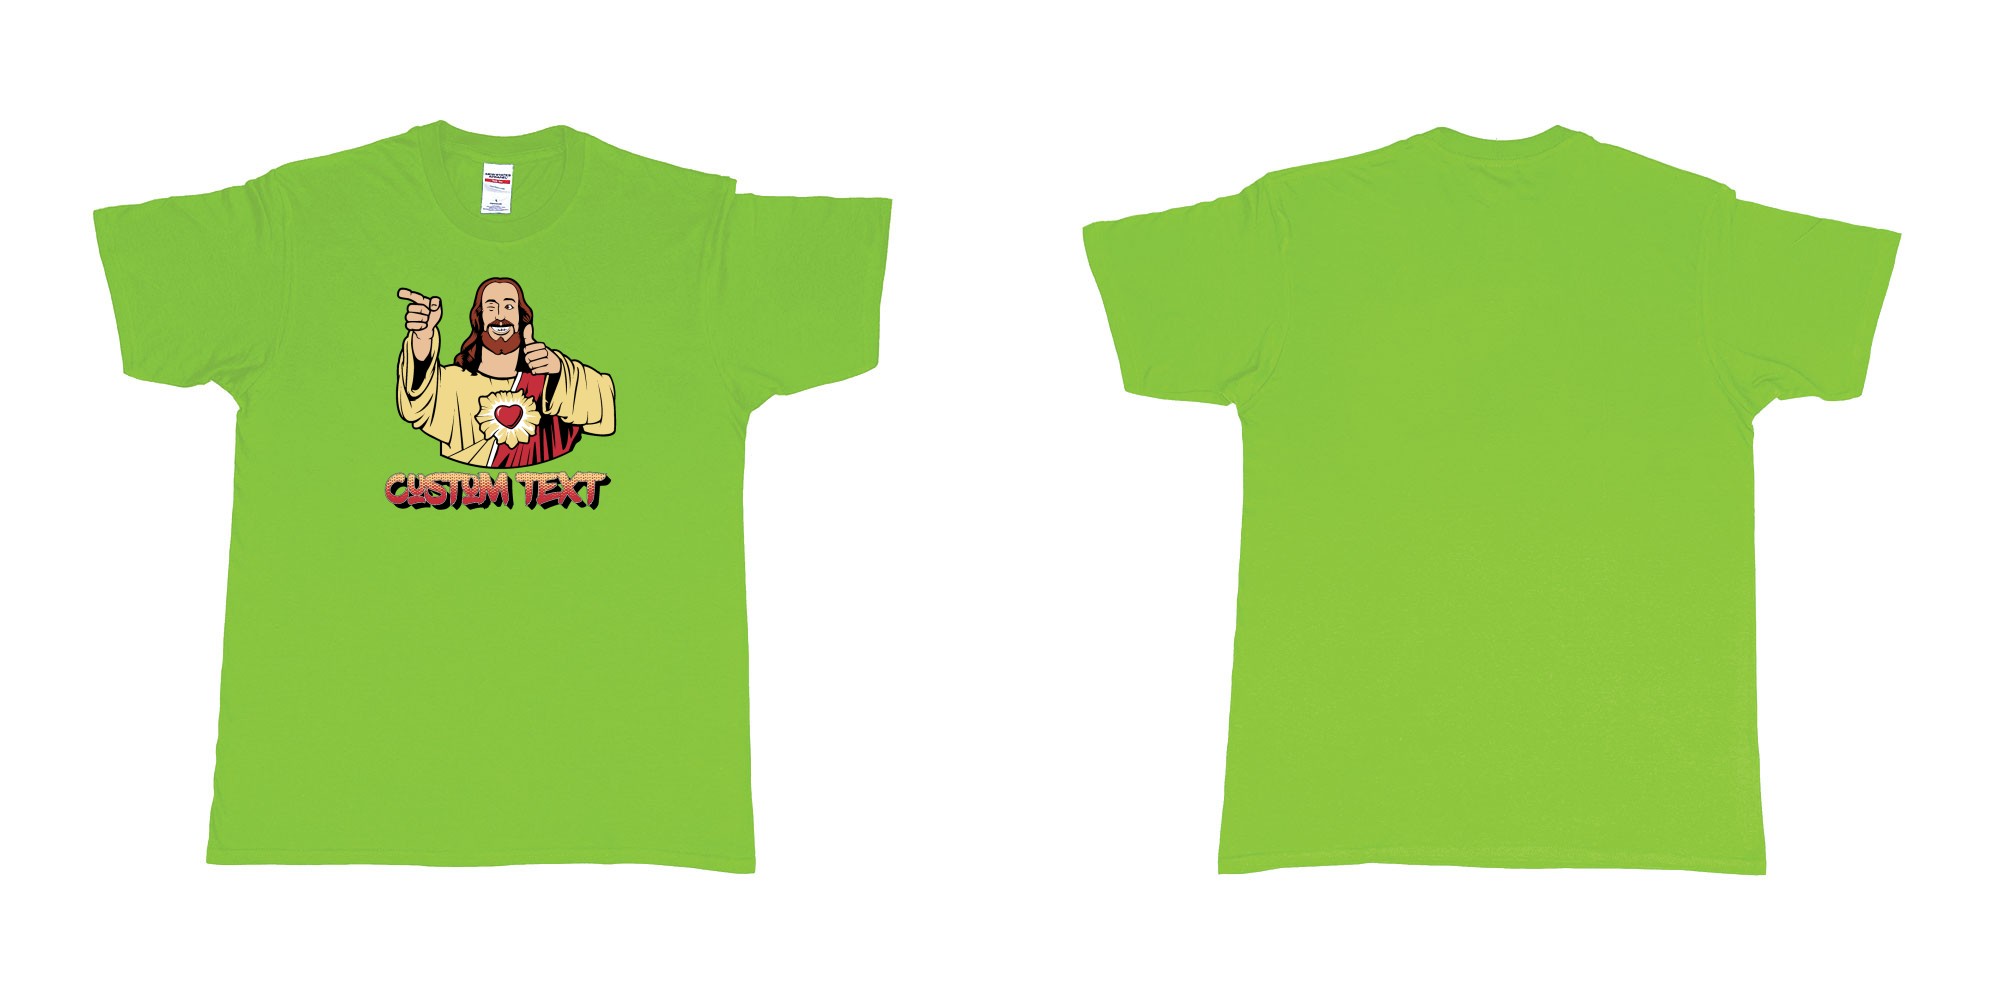 Custom tshirt design buddy christ custom text in fabric color lime choice your own text made in Bali by The Pirate Way